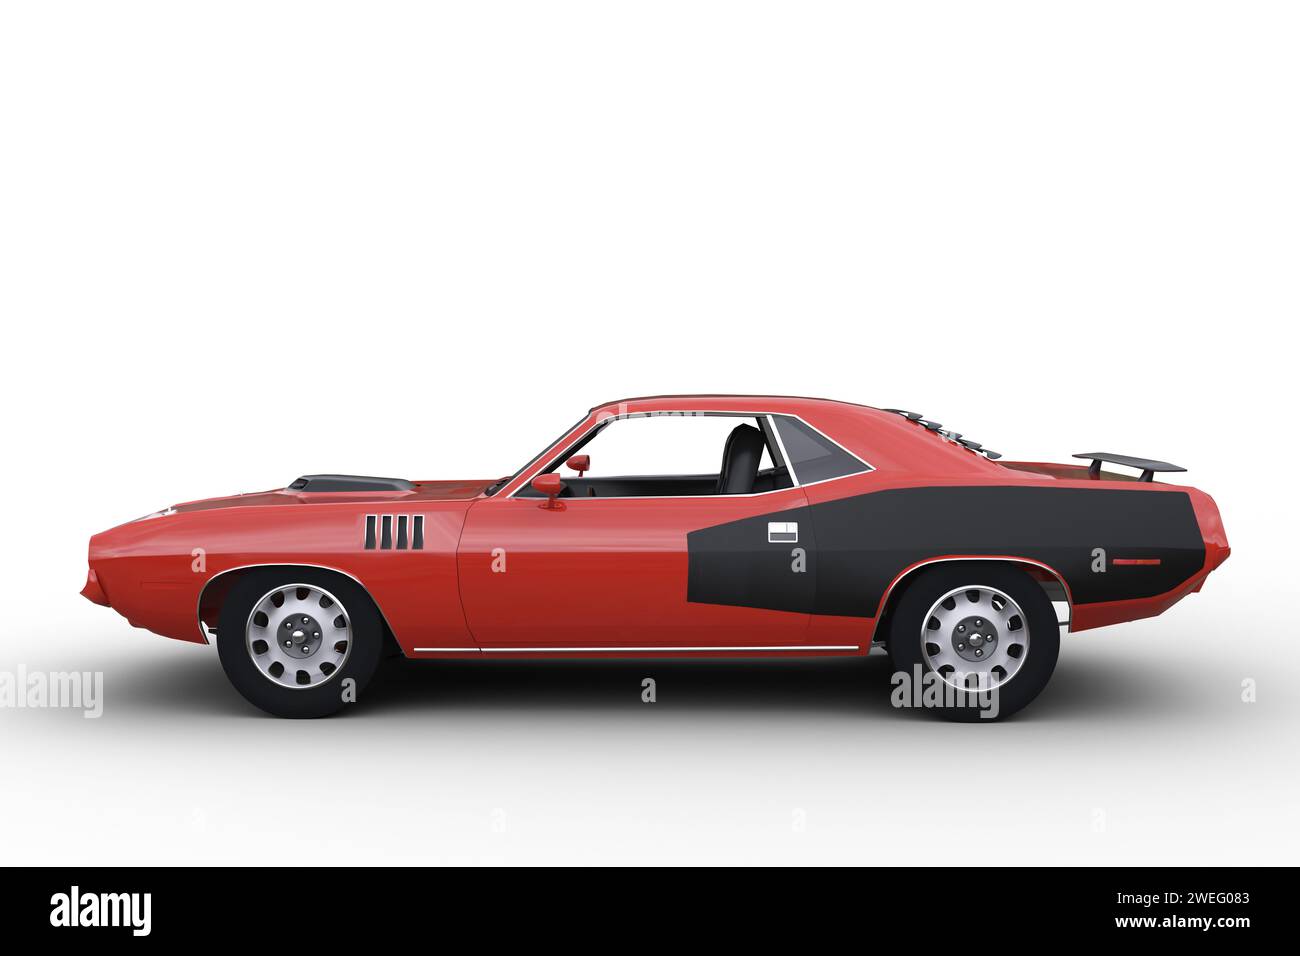 Red and black retro American muscle car seen from side view. 3d illustration isolated on a white background. Stock Photo